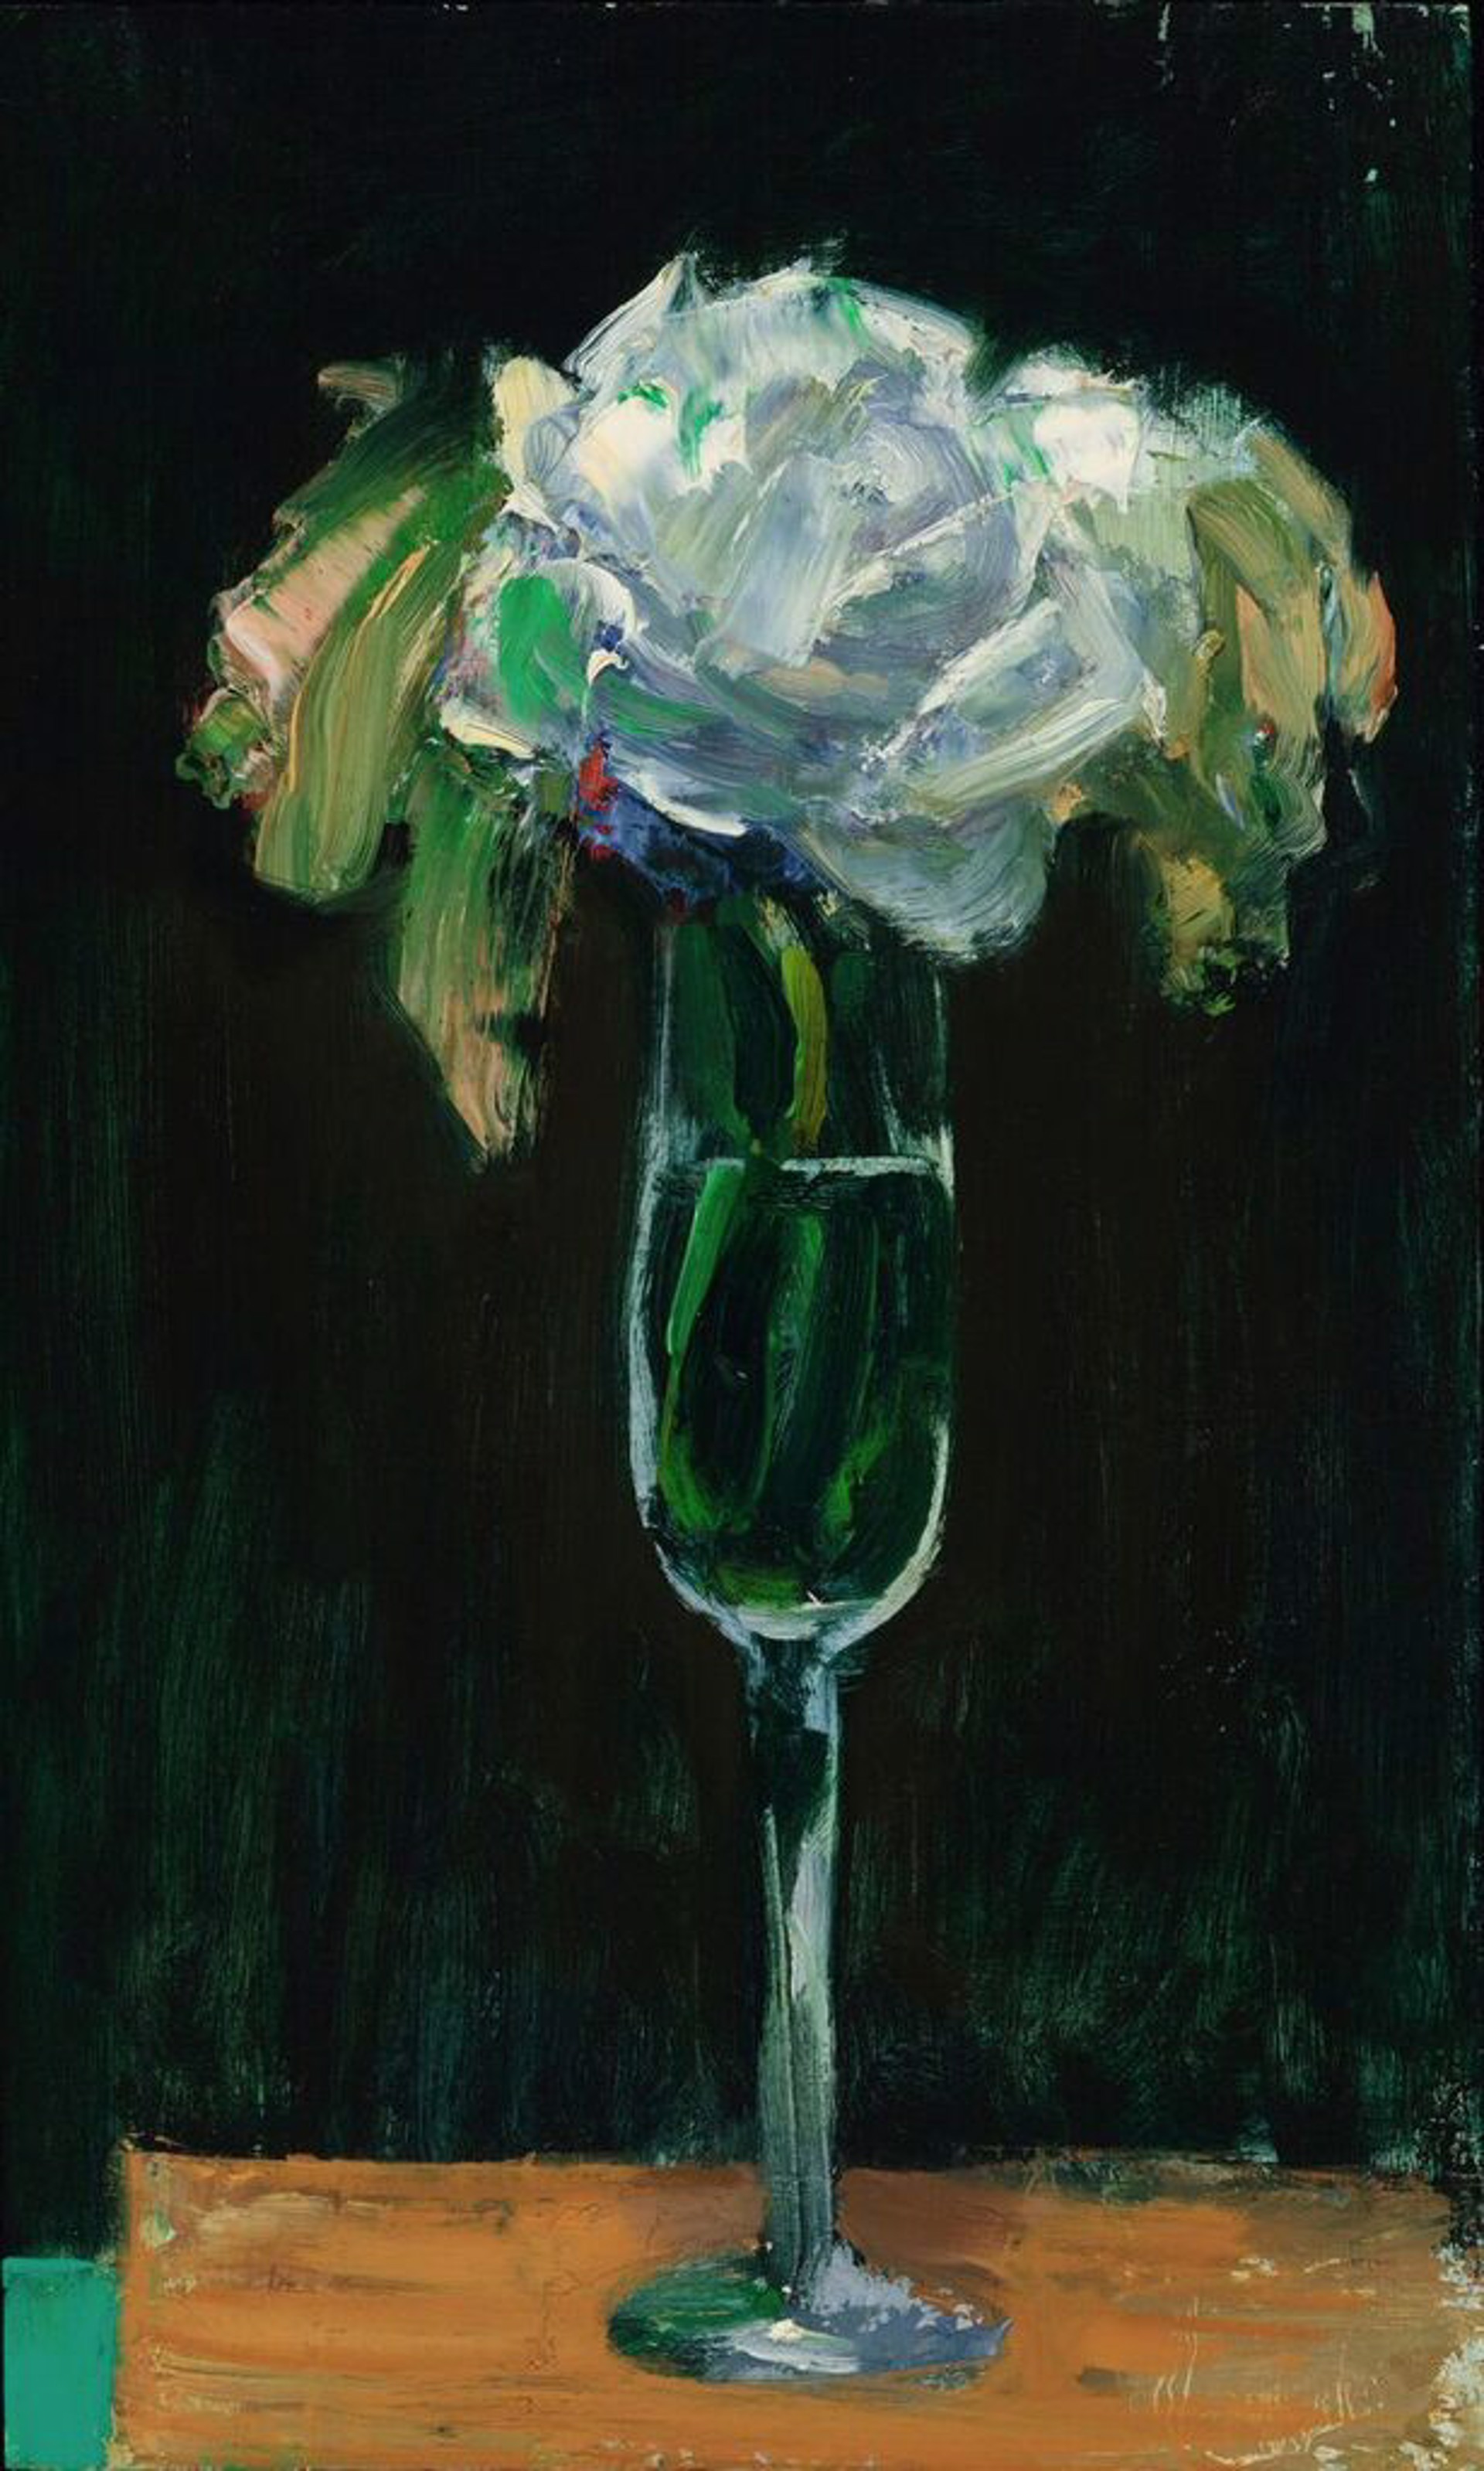 White Rose #2,  2016 by Donald Beal